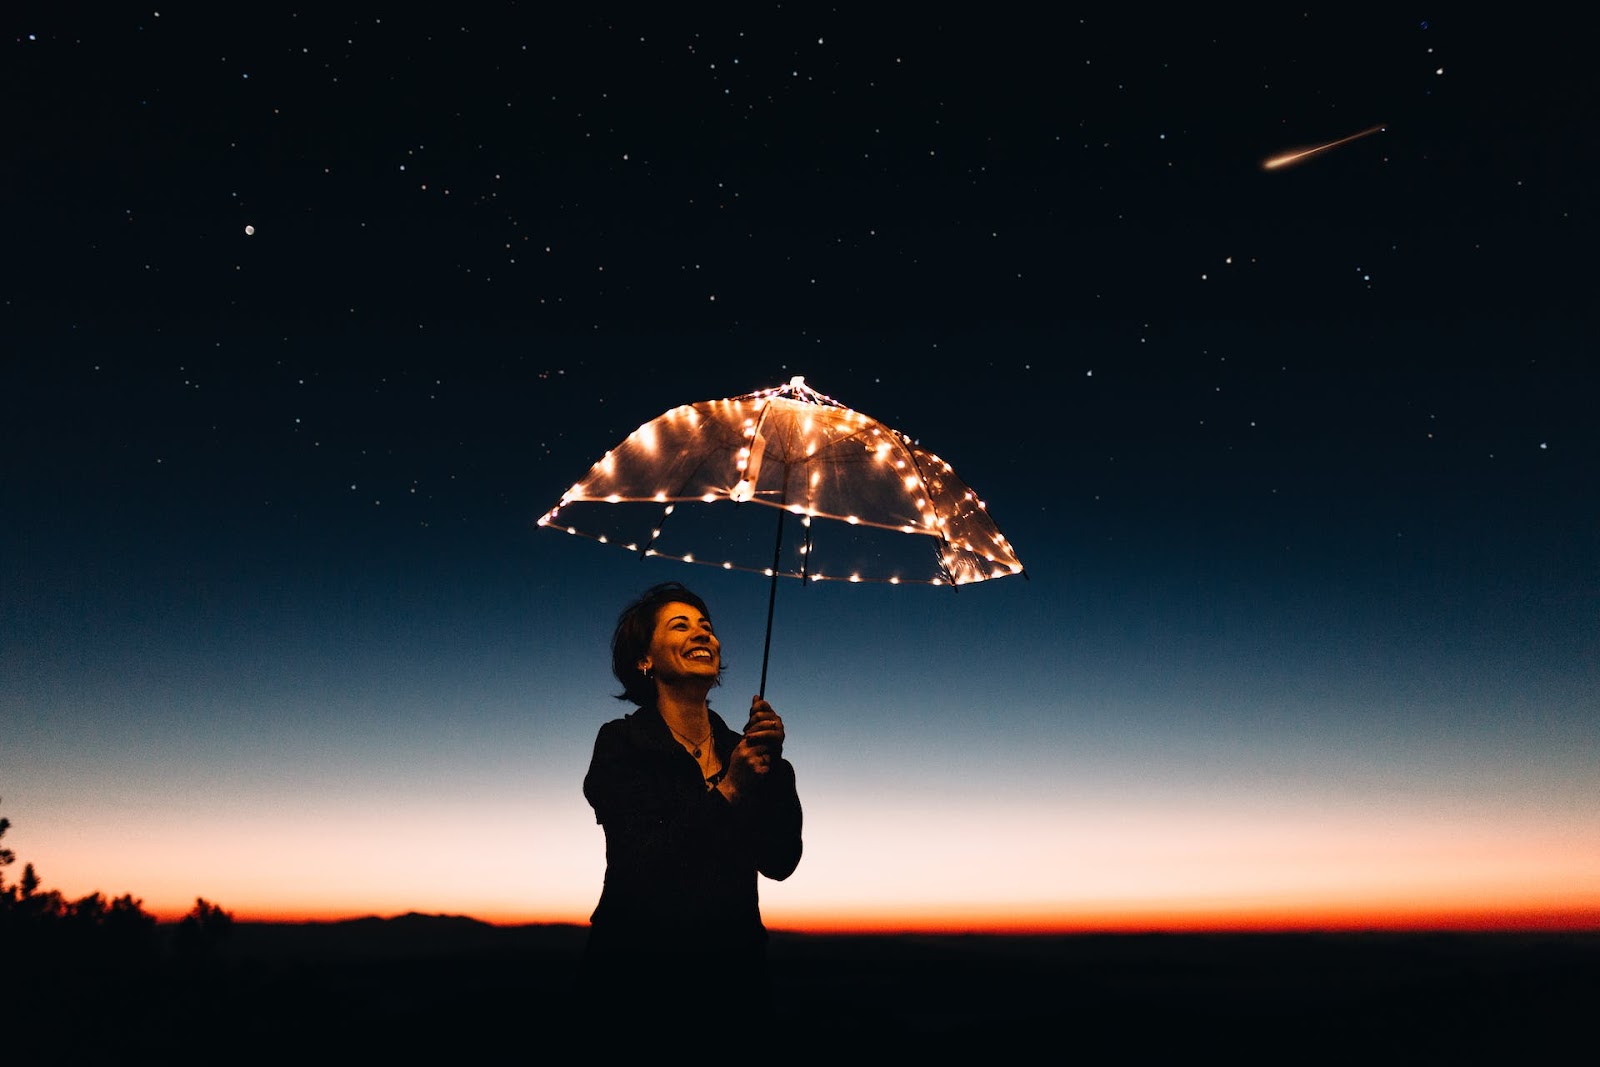 happy woman smiling holding an umbrella with lights under a starry night